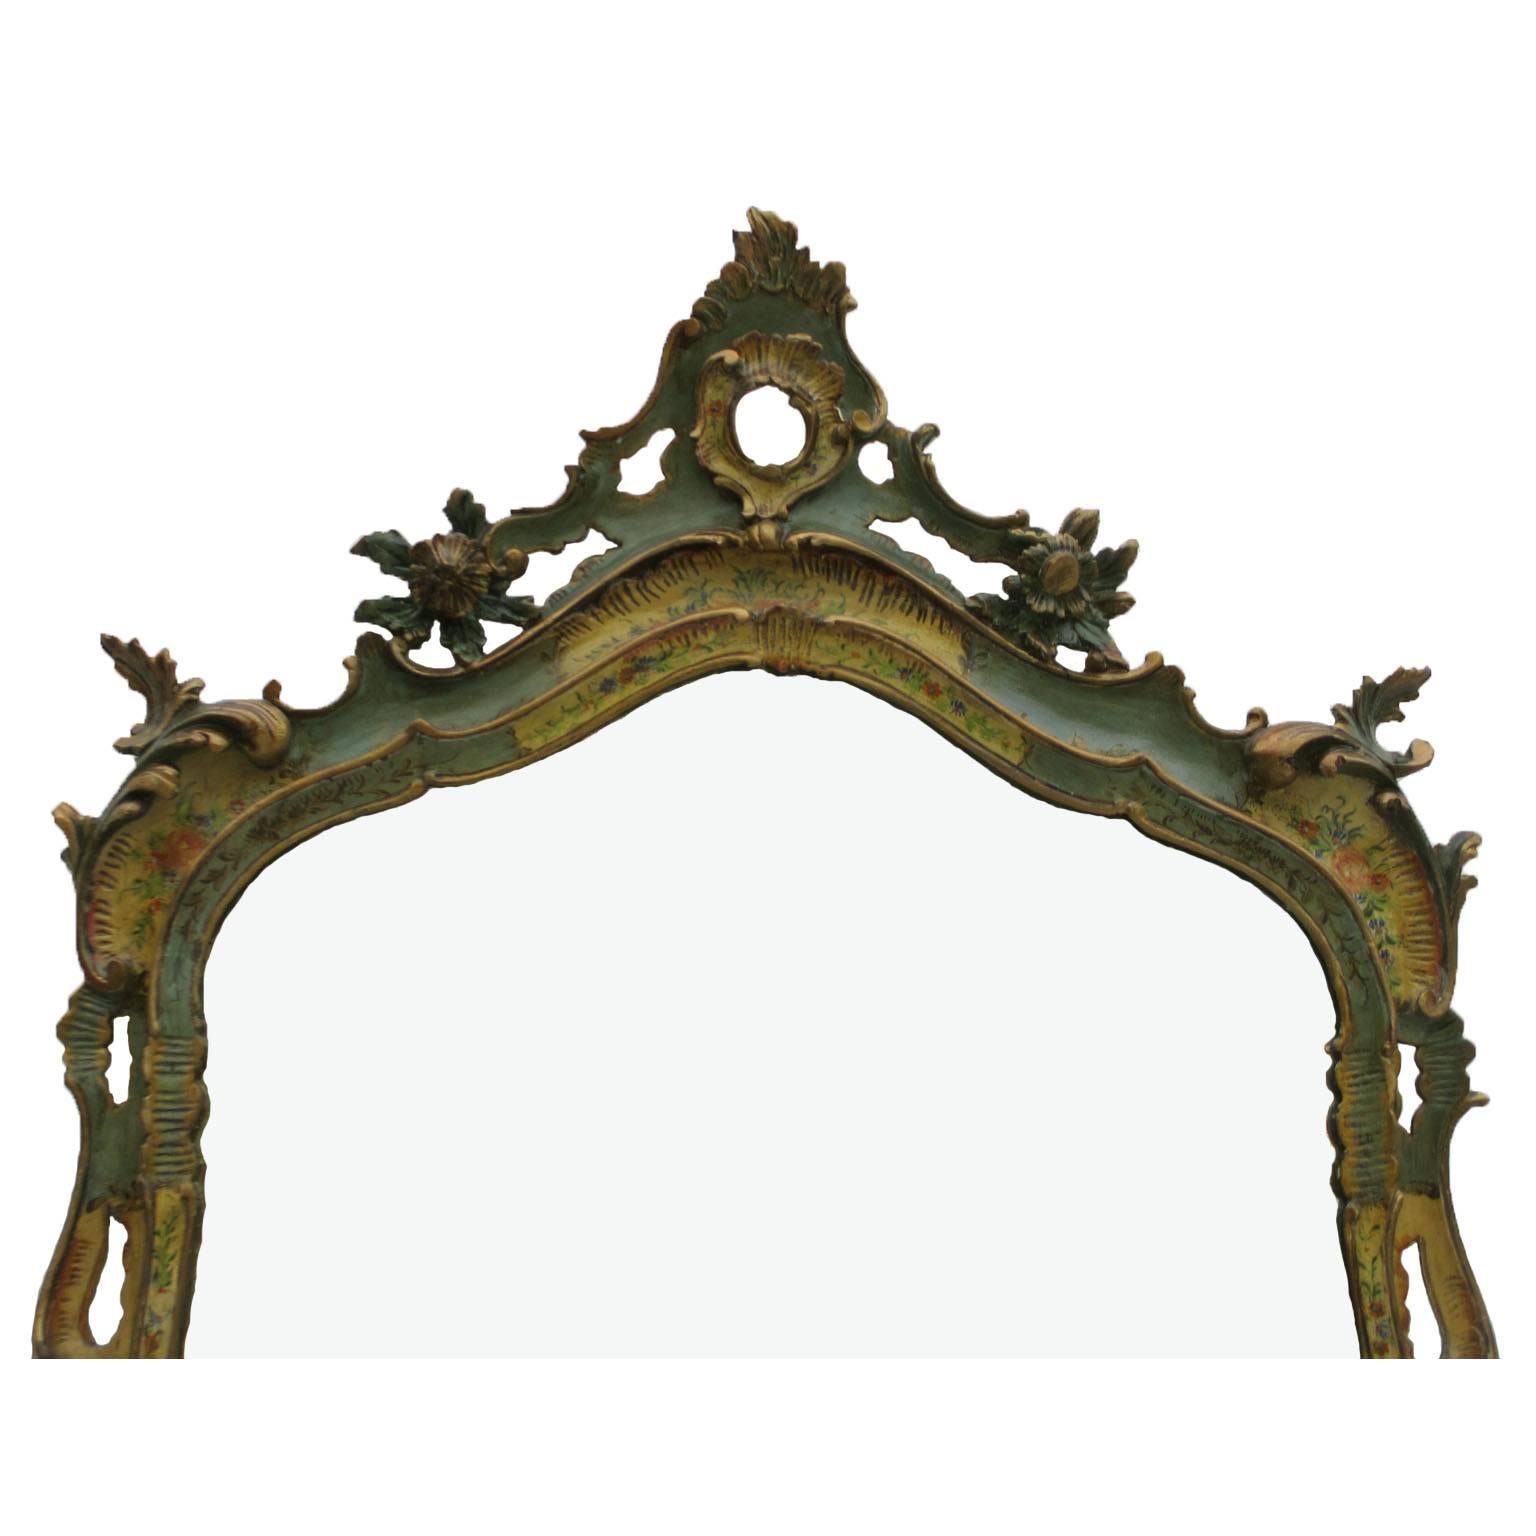 A rare Italian 19th-20th century polychrome painted and floral decorated carved wood console and mirror, the serpentine bombé form console decorated with parcel-gilt and colorful floral bouquets over a green and ivory painted background, the front